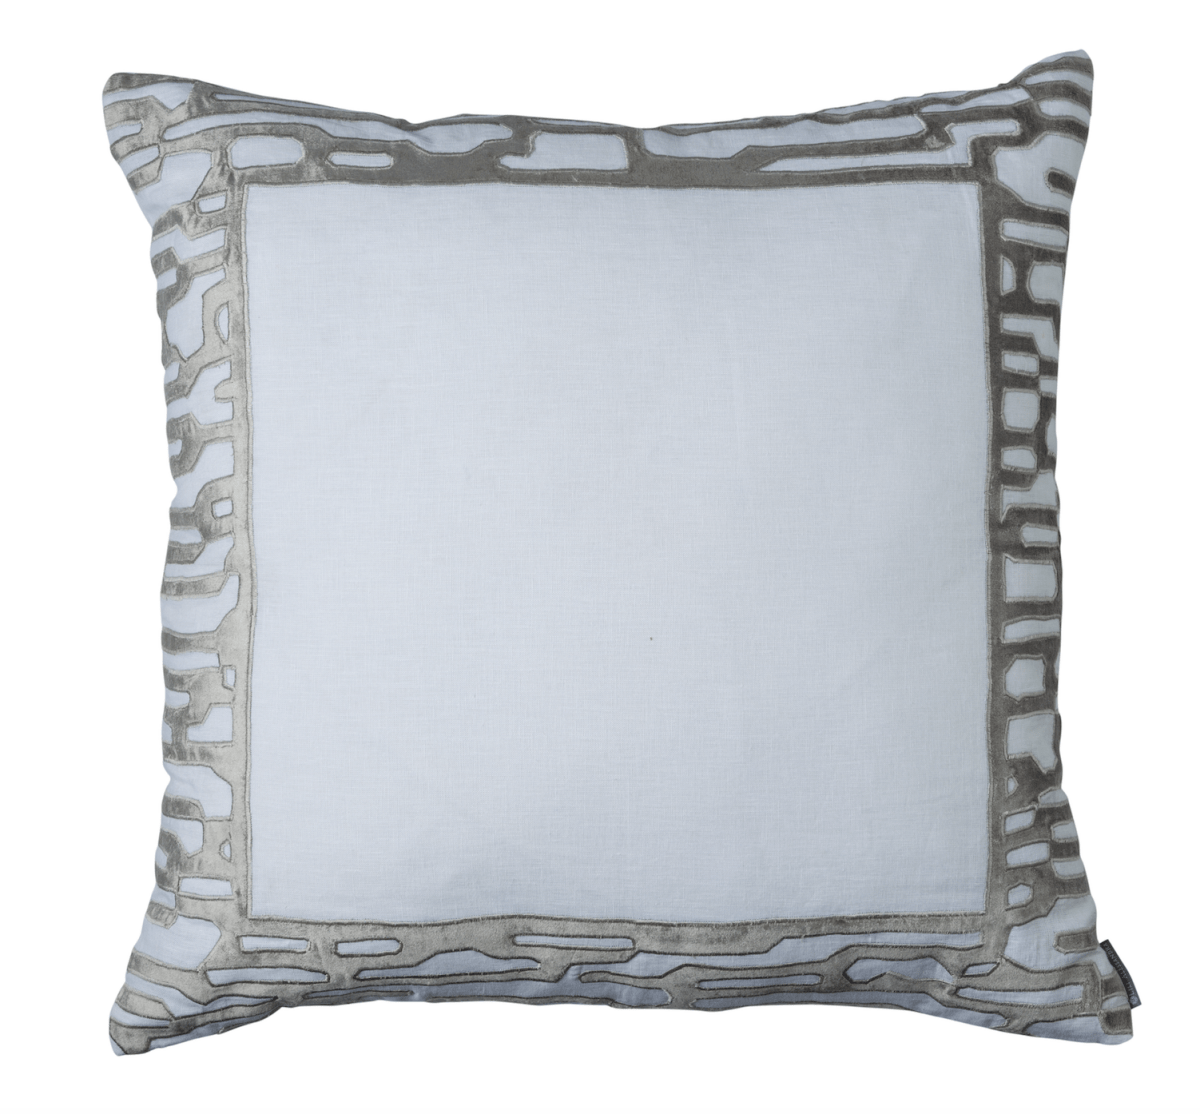 Christian White and Platinum Euro Pillow by Lili Alessandra